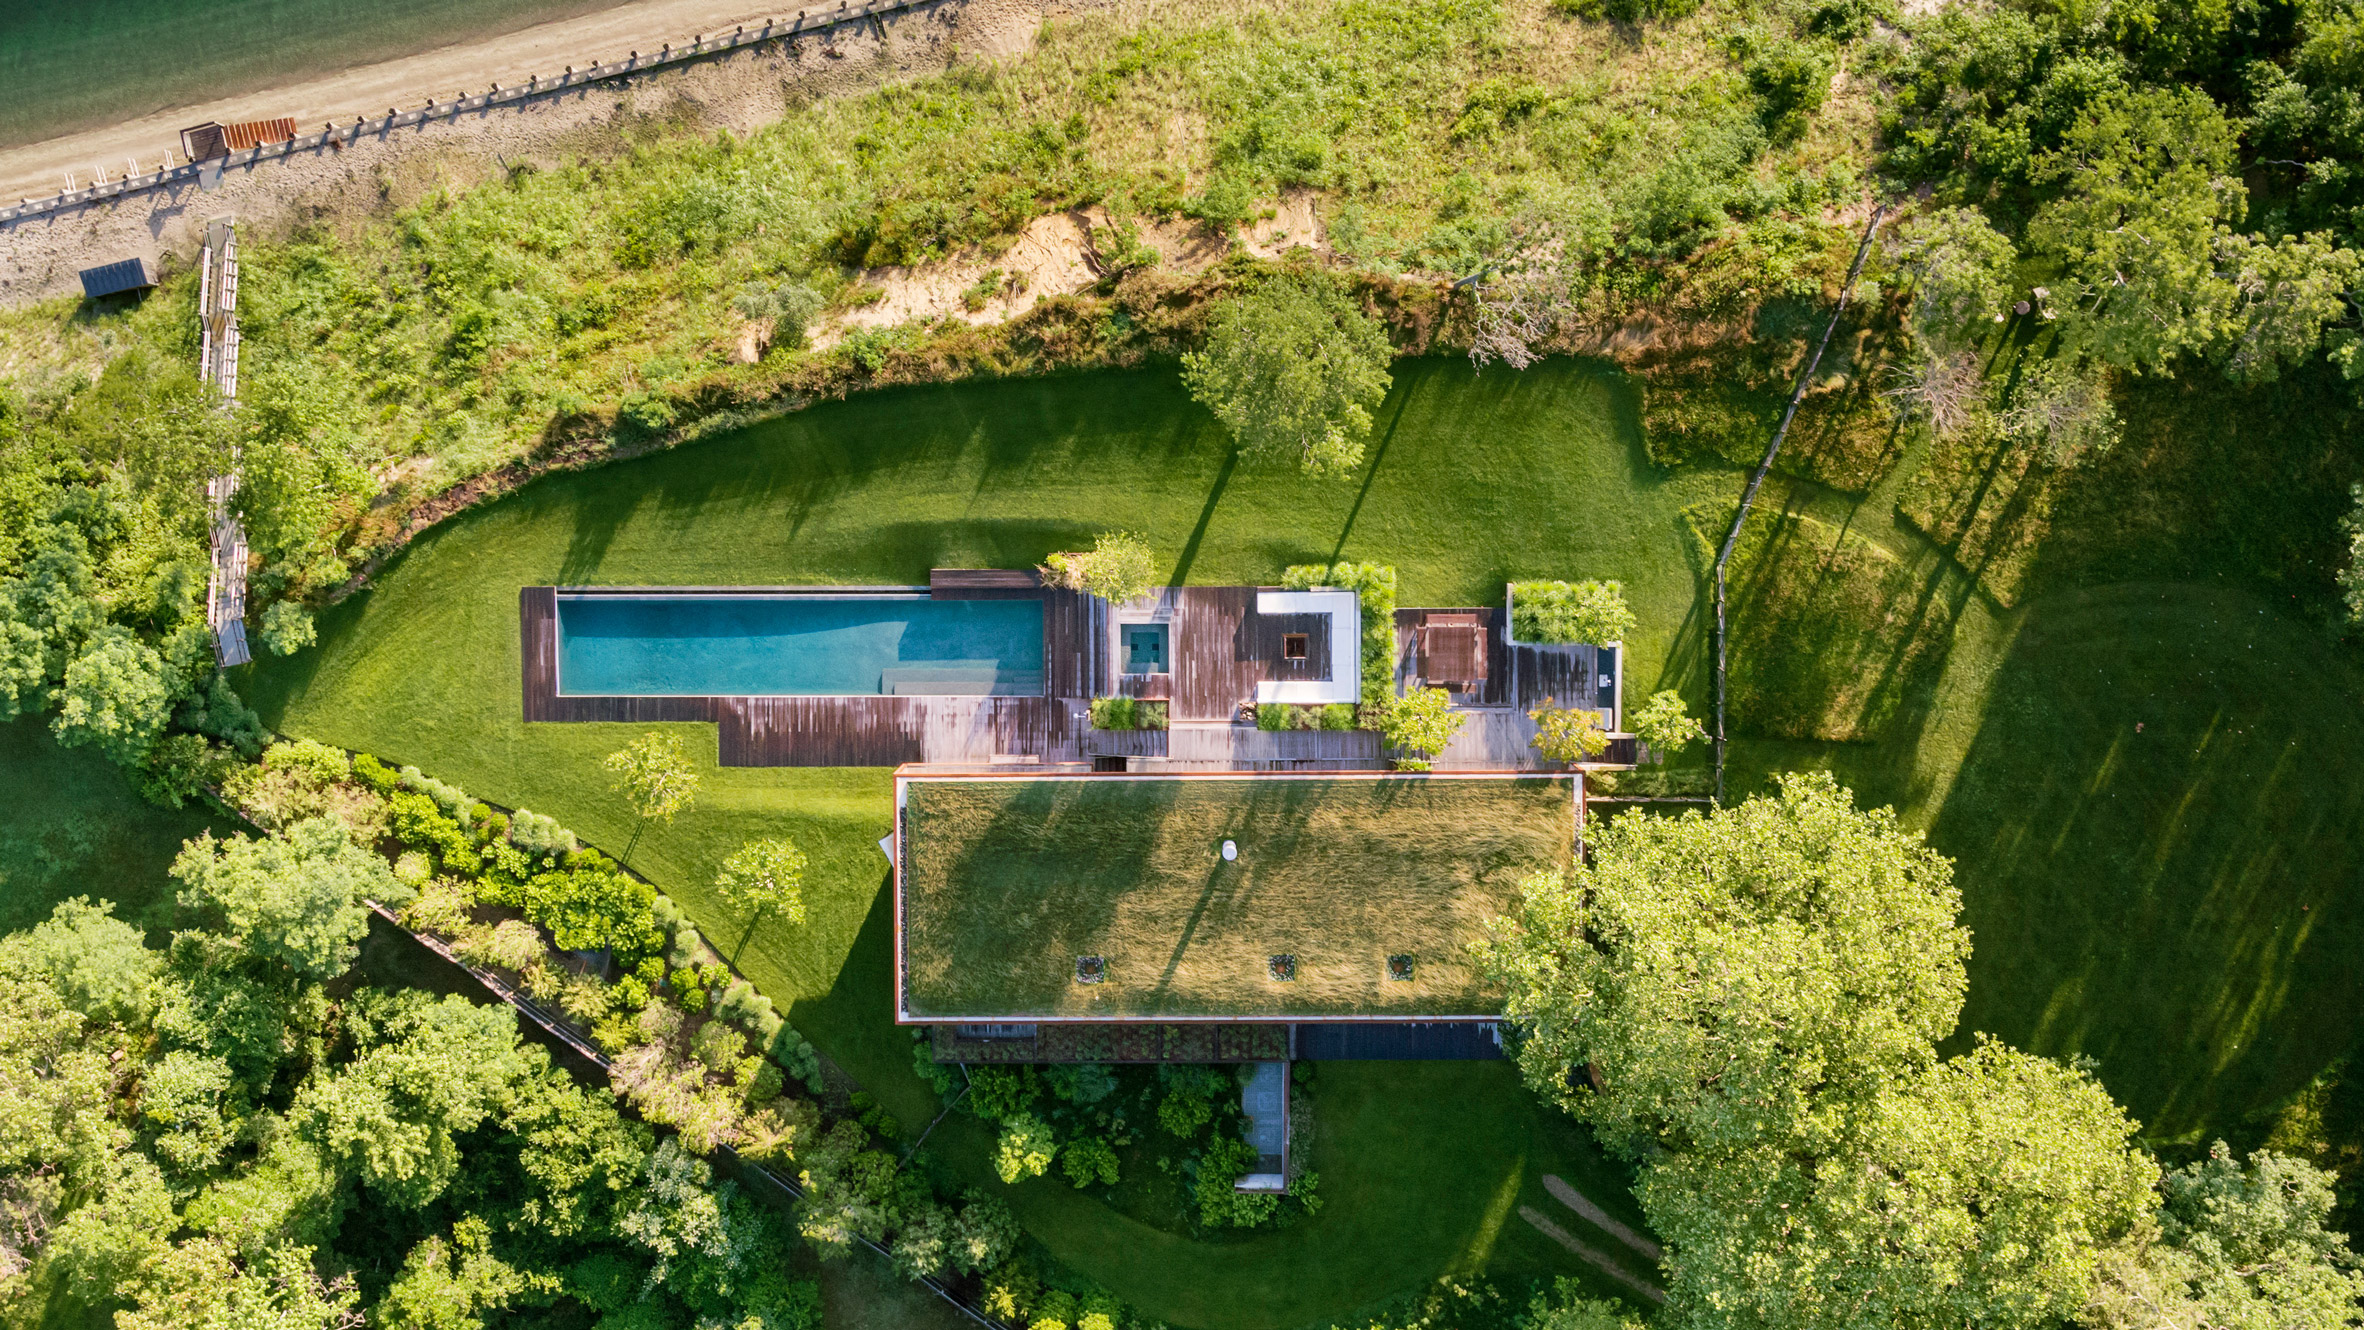 10 houses photographed from above – birds-eye views